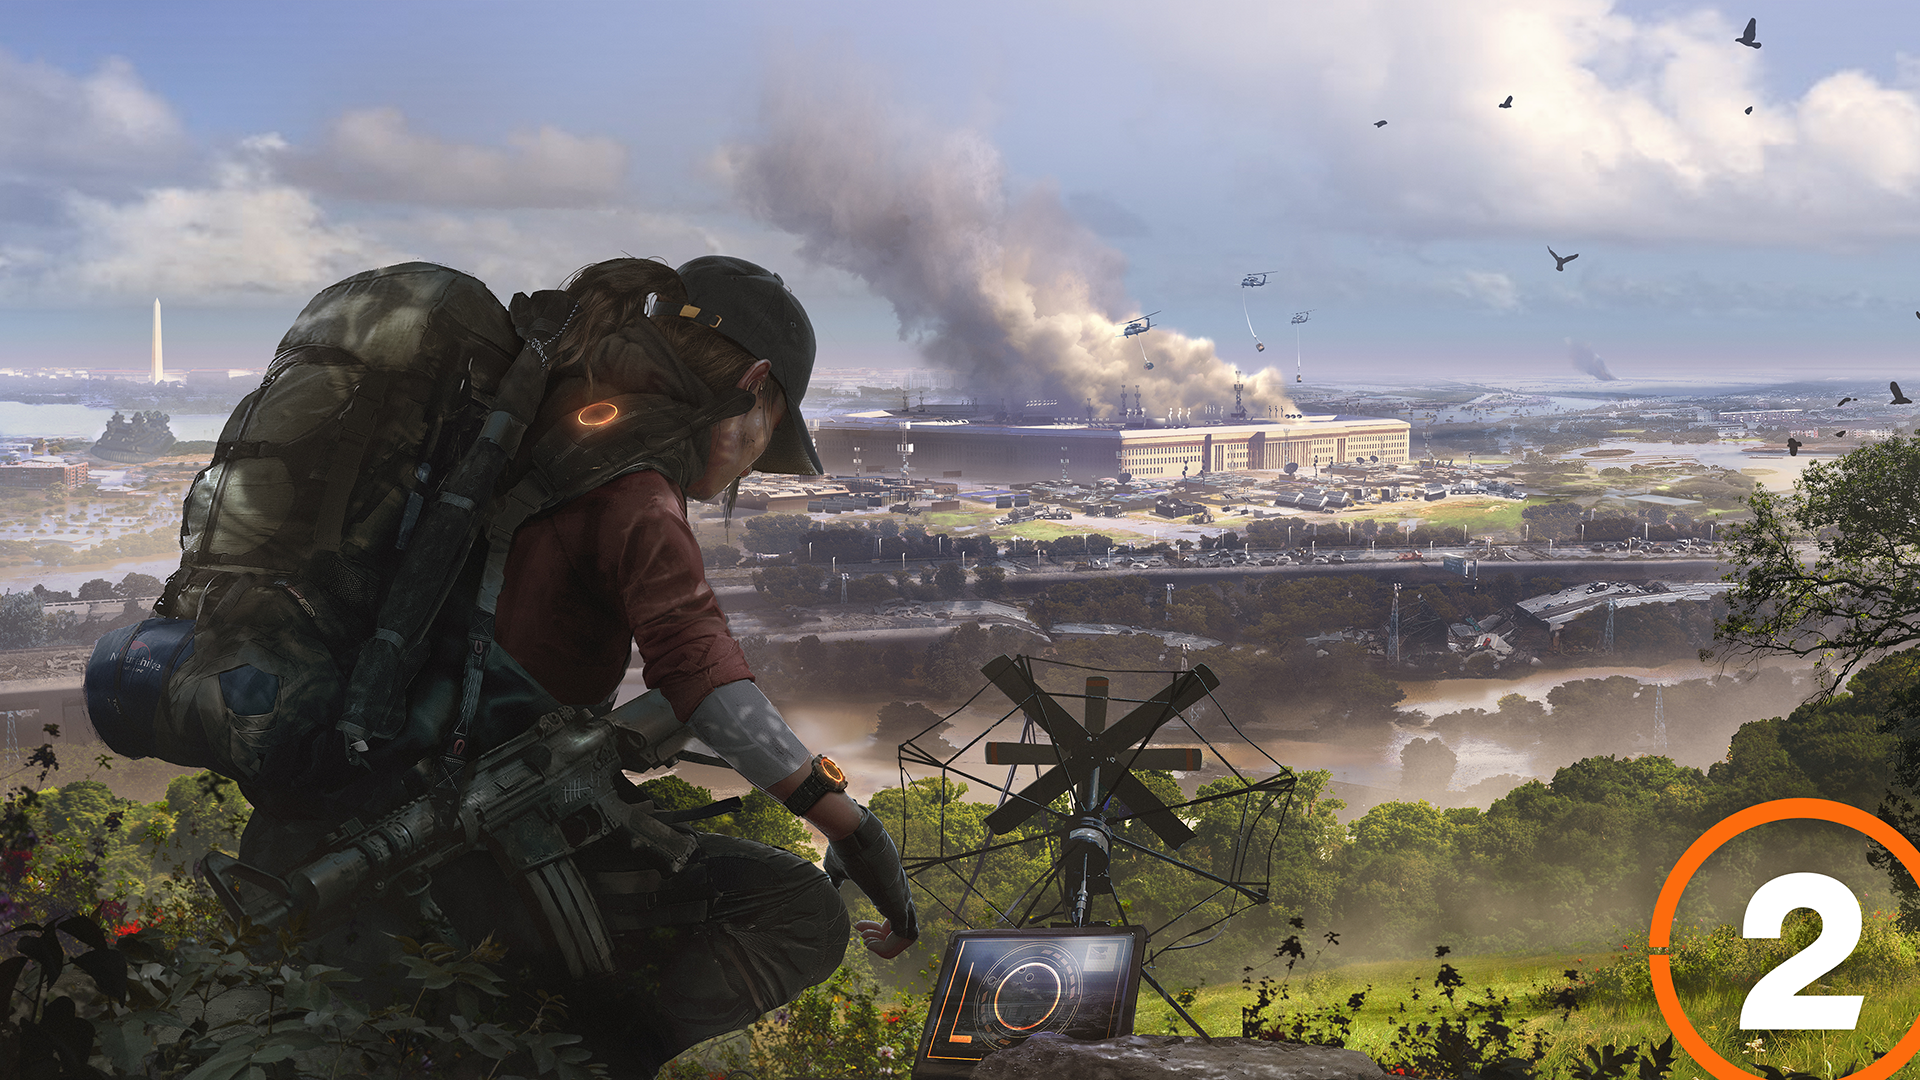 General 1920x1080 Tom Clancy's The Division 2 video game art PC gaming apocalyptic video games